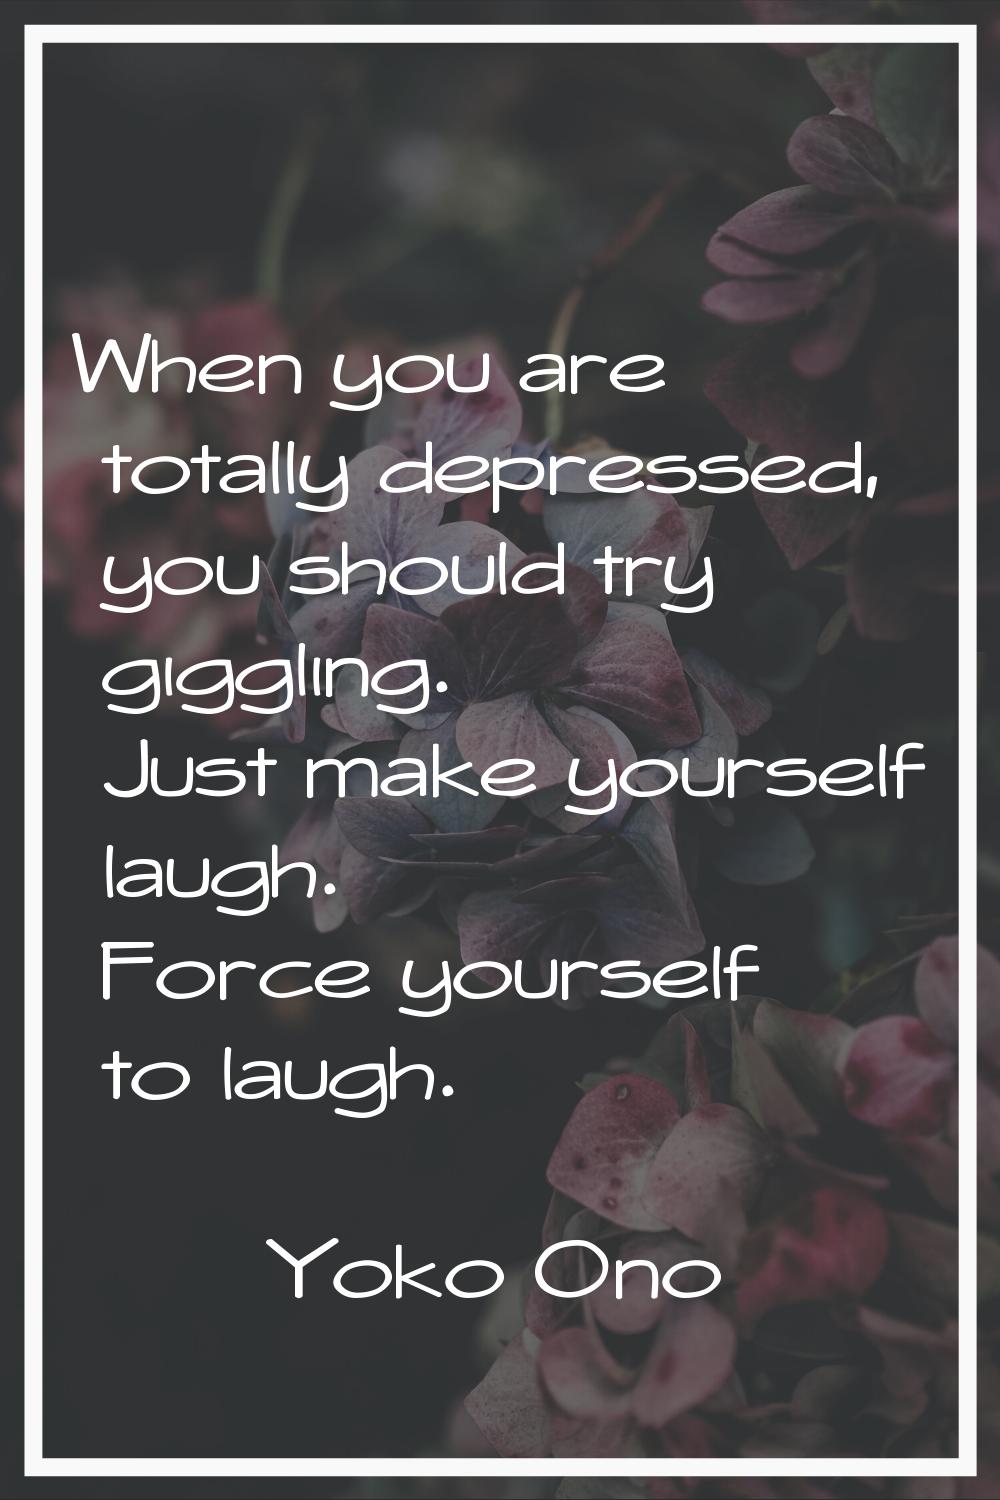 When you are totally depressed, you should try giggling. Just make yourself laugh. Force yourself t